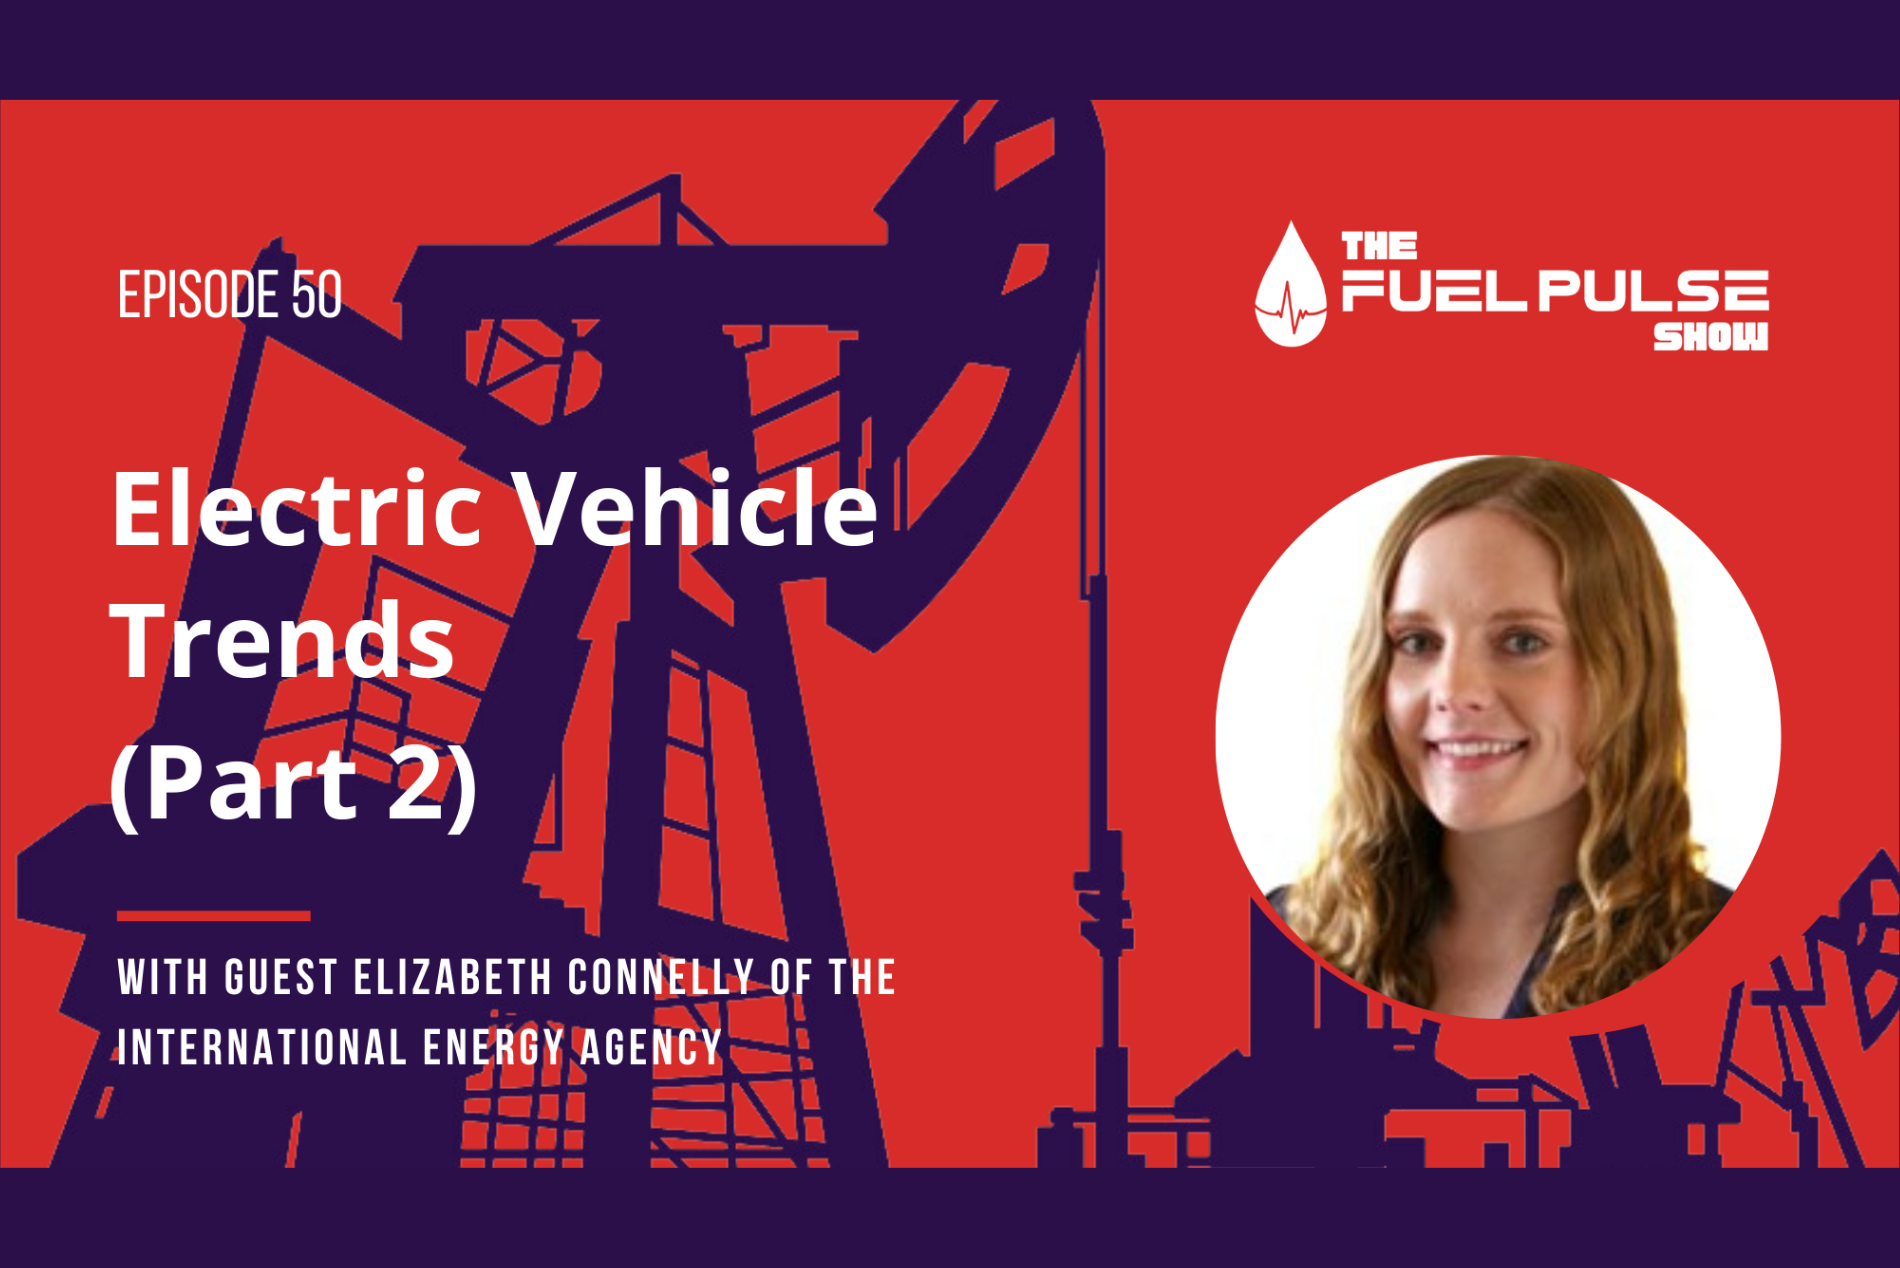 Episode 050 - Electric Vehicle Trends with Elizabeth Connelly - Part 2